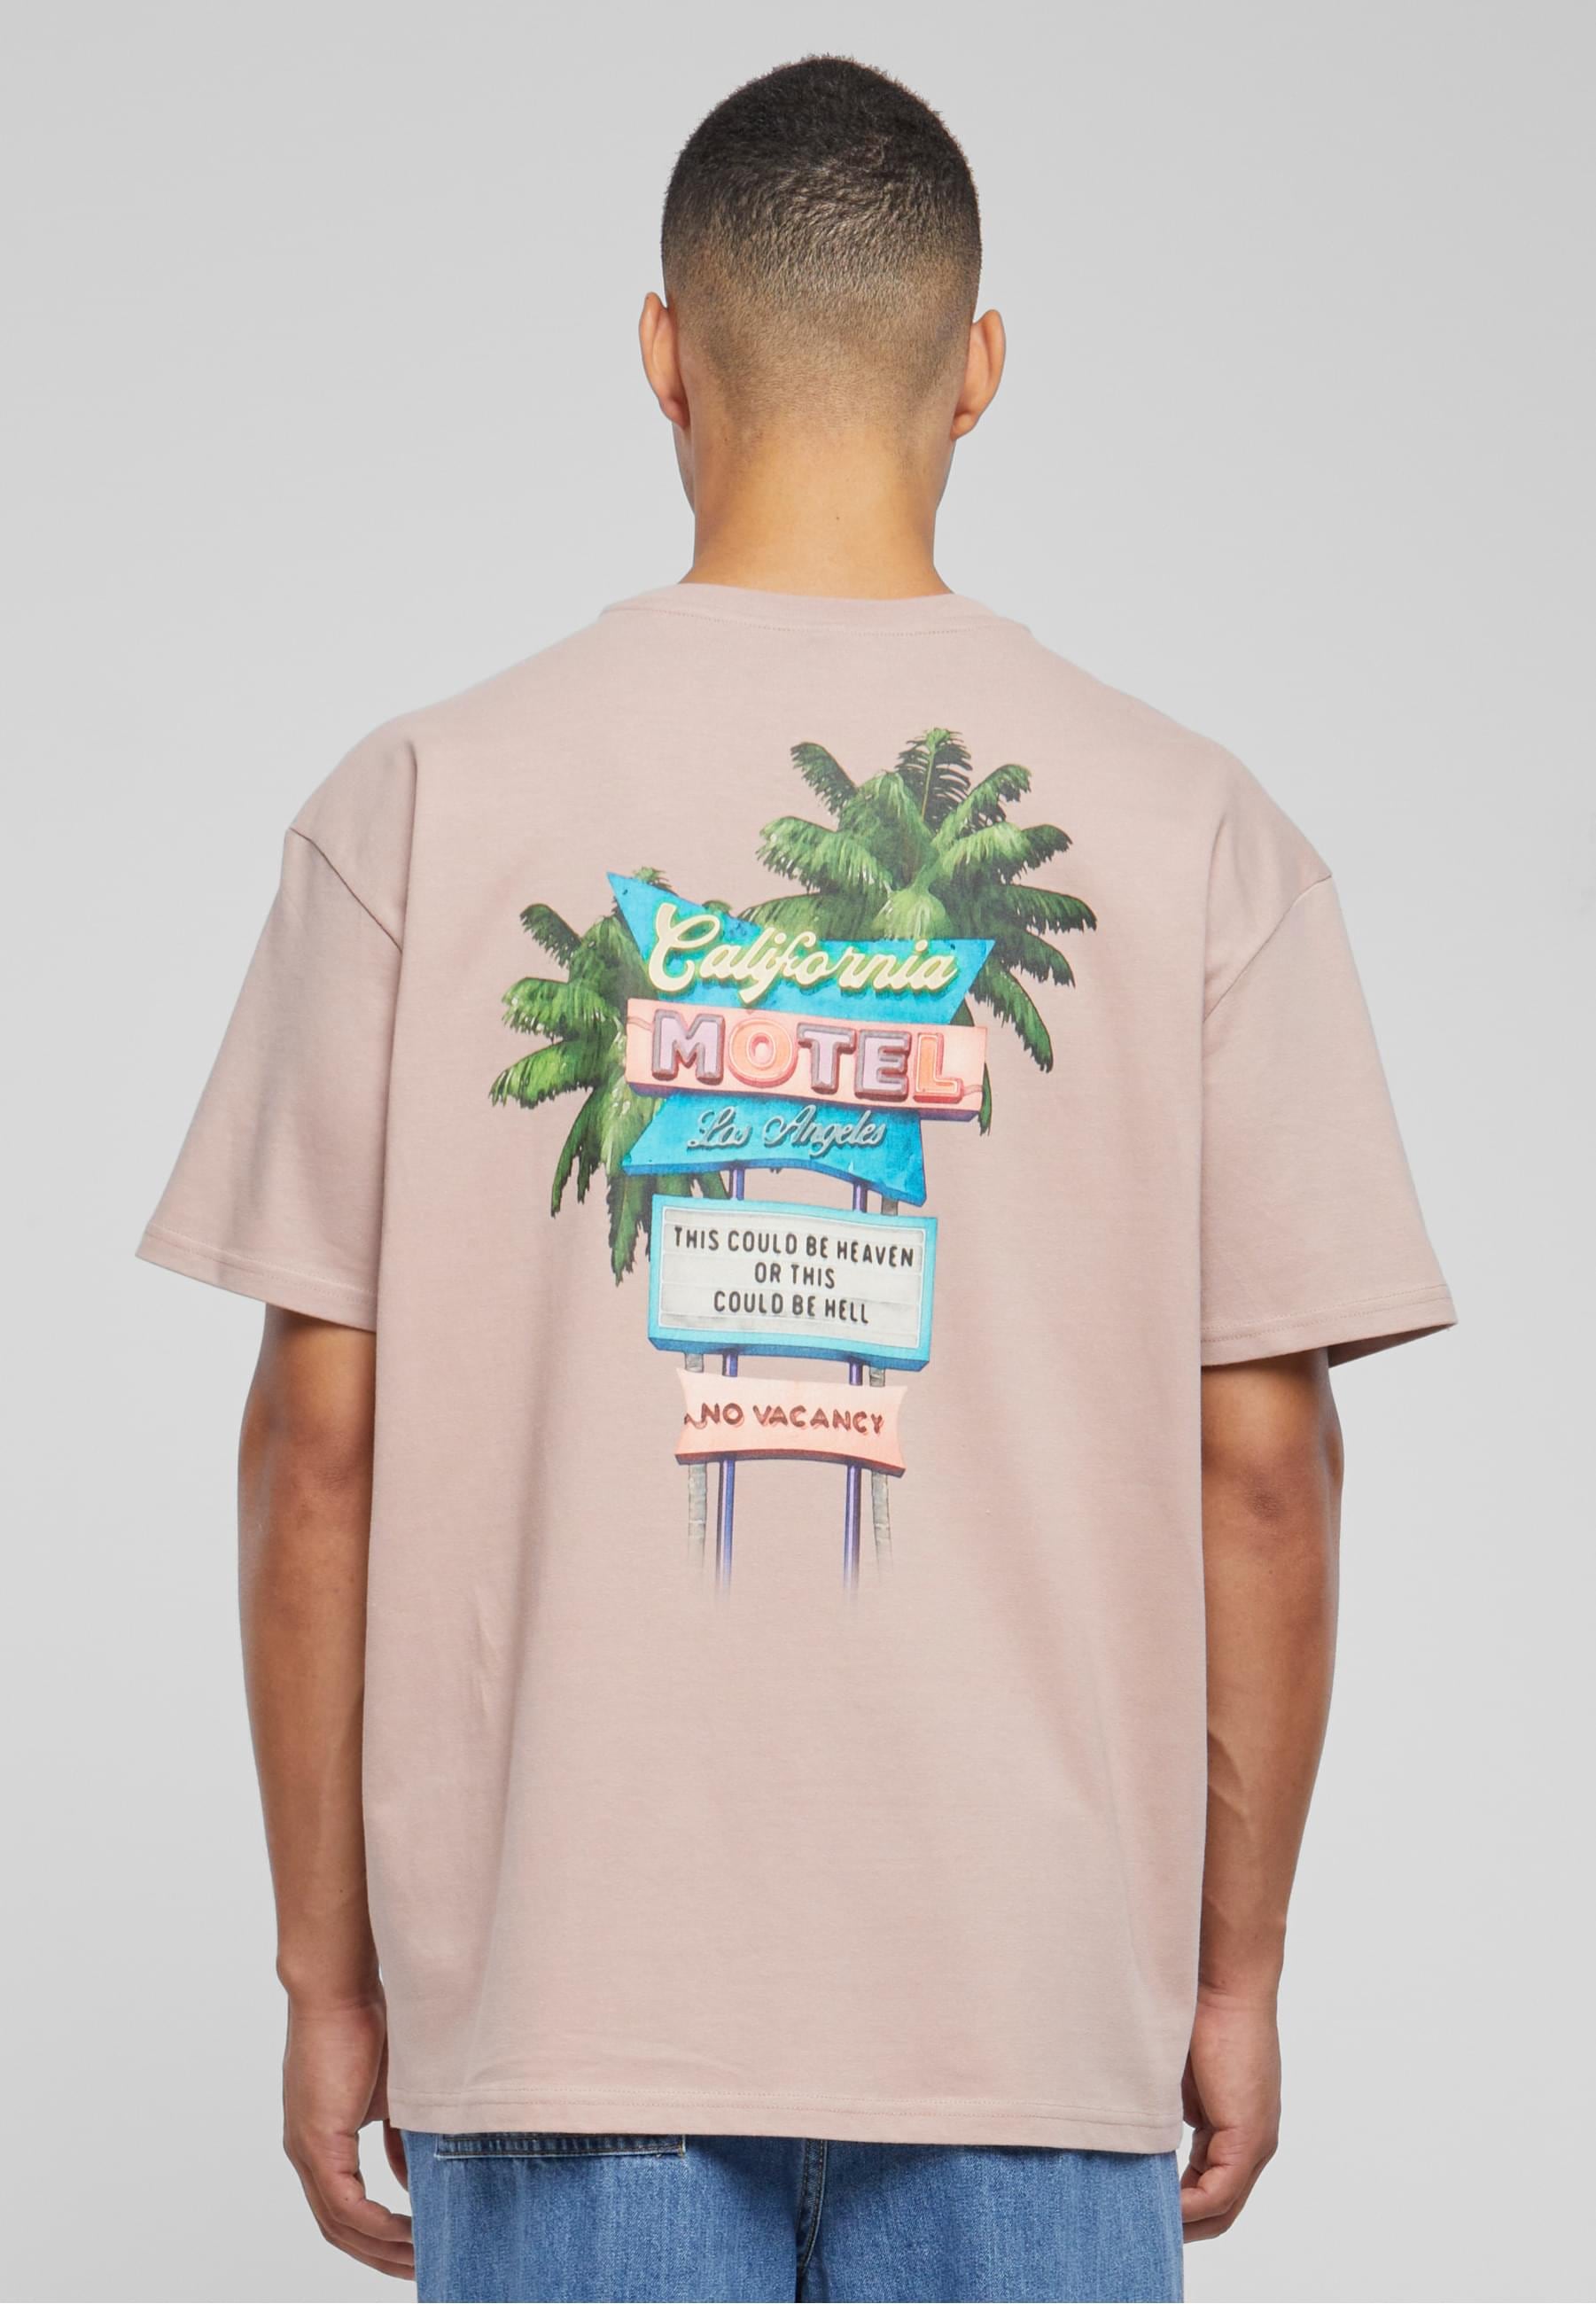 Upscale by Mister Tee T-Shirt »Upscale by Mister Tee Unisex California Motel Oversize Tee«, (1 tlg.)